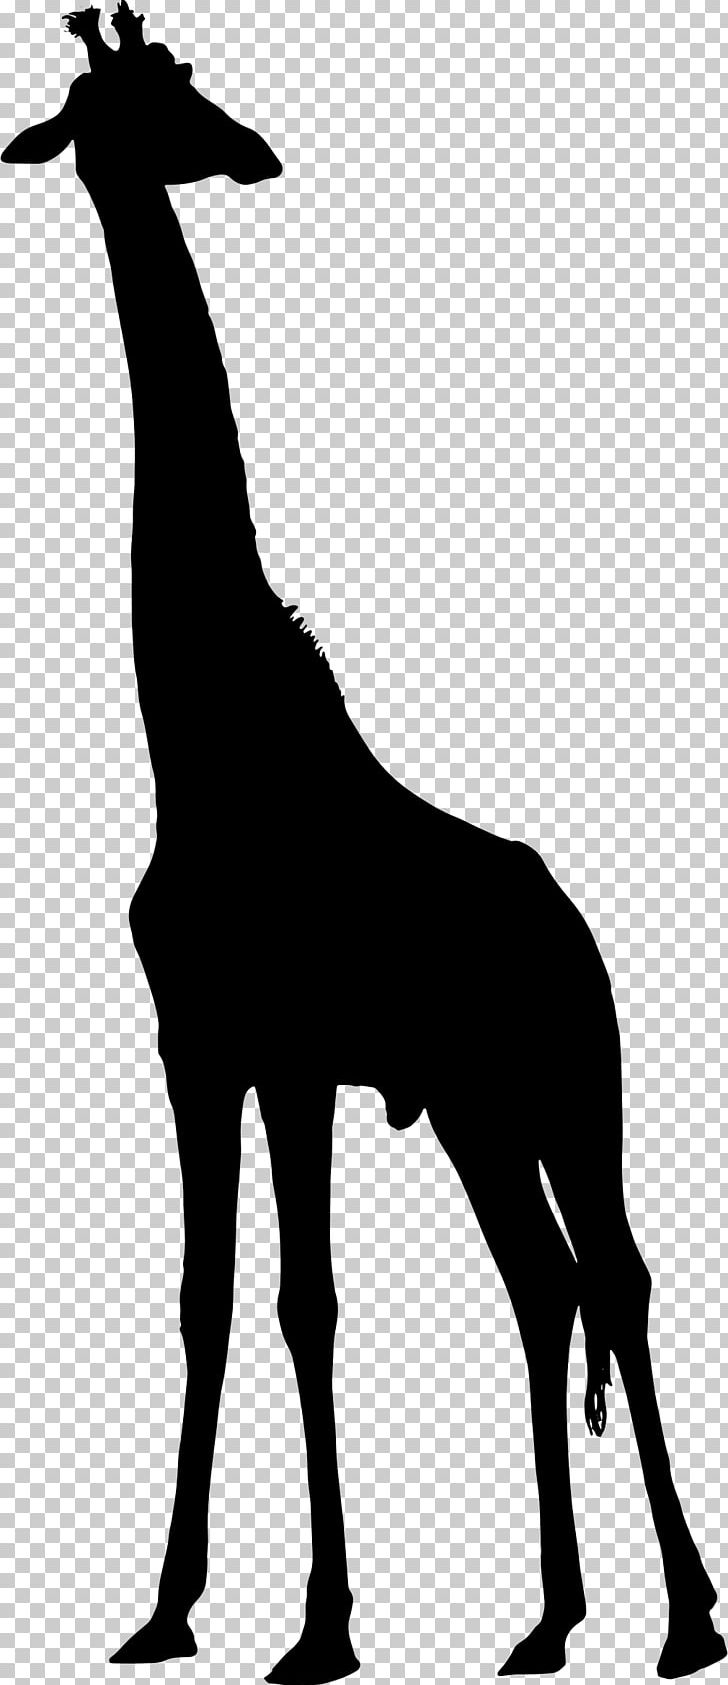 West African Giraffe Silhouette PNG, Clipart, Animals, Art, Black And White, Fauna, Giraffe Free PNG Download